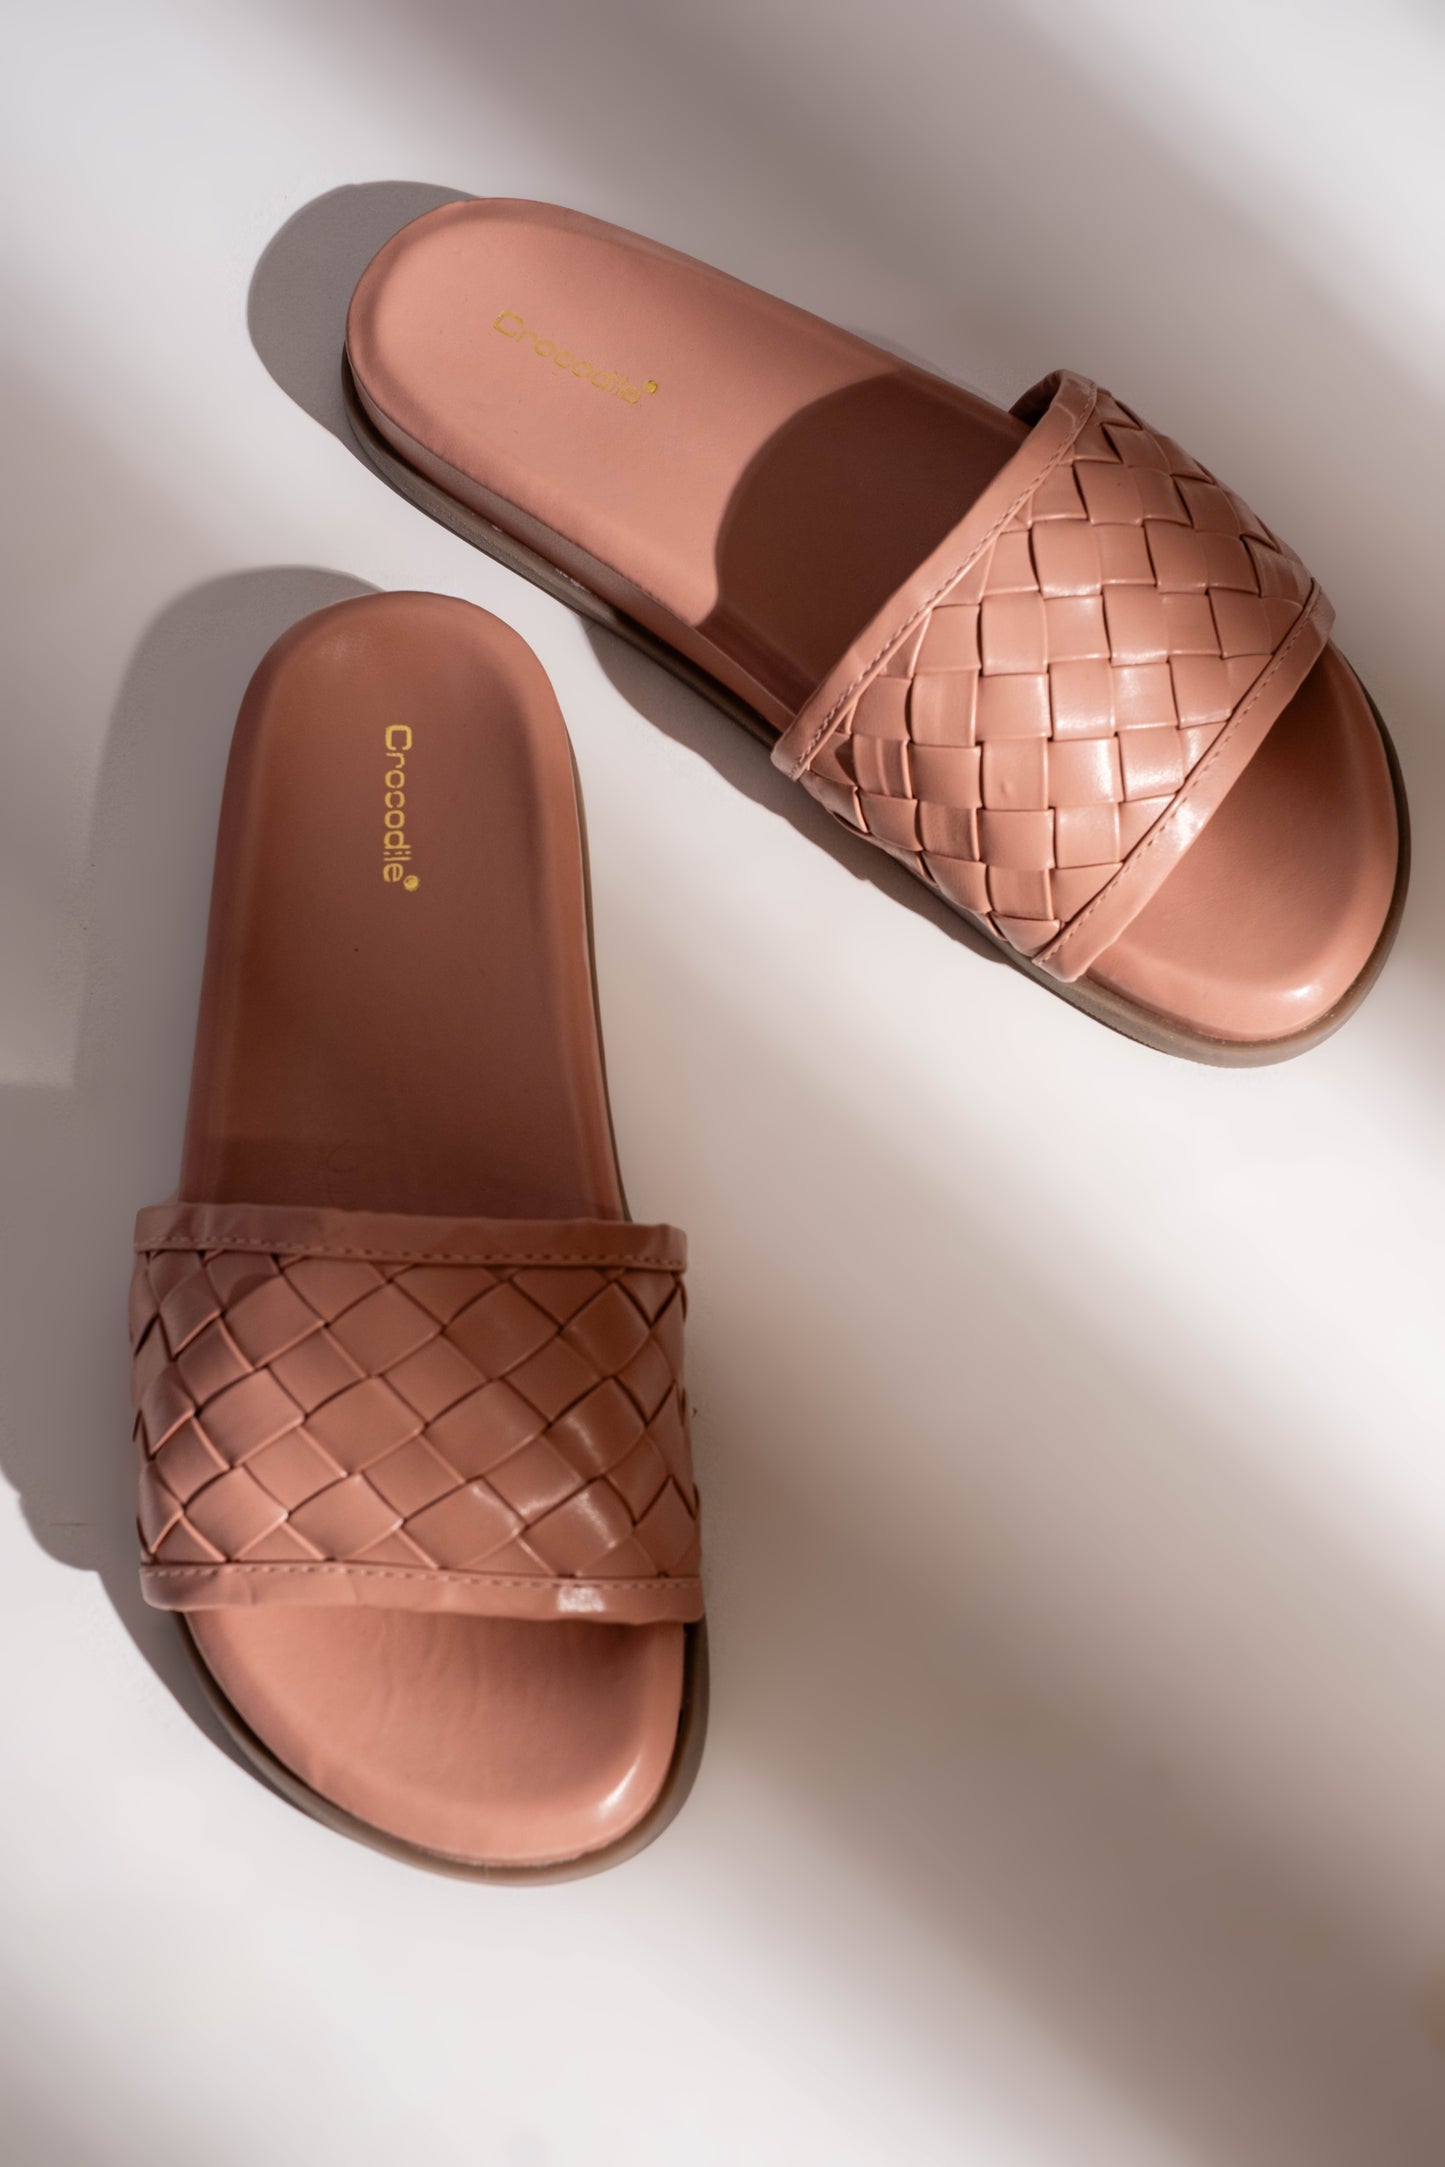 Calista - Braided Strap Slides with Round Toe in Blush Pink